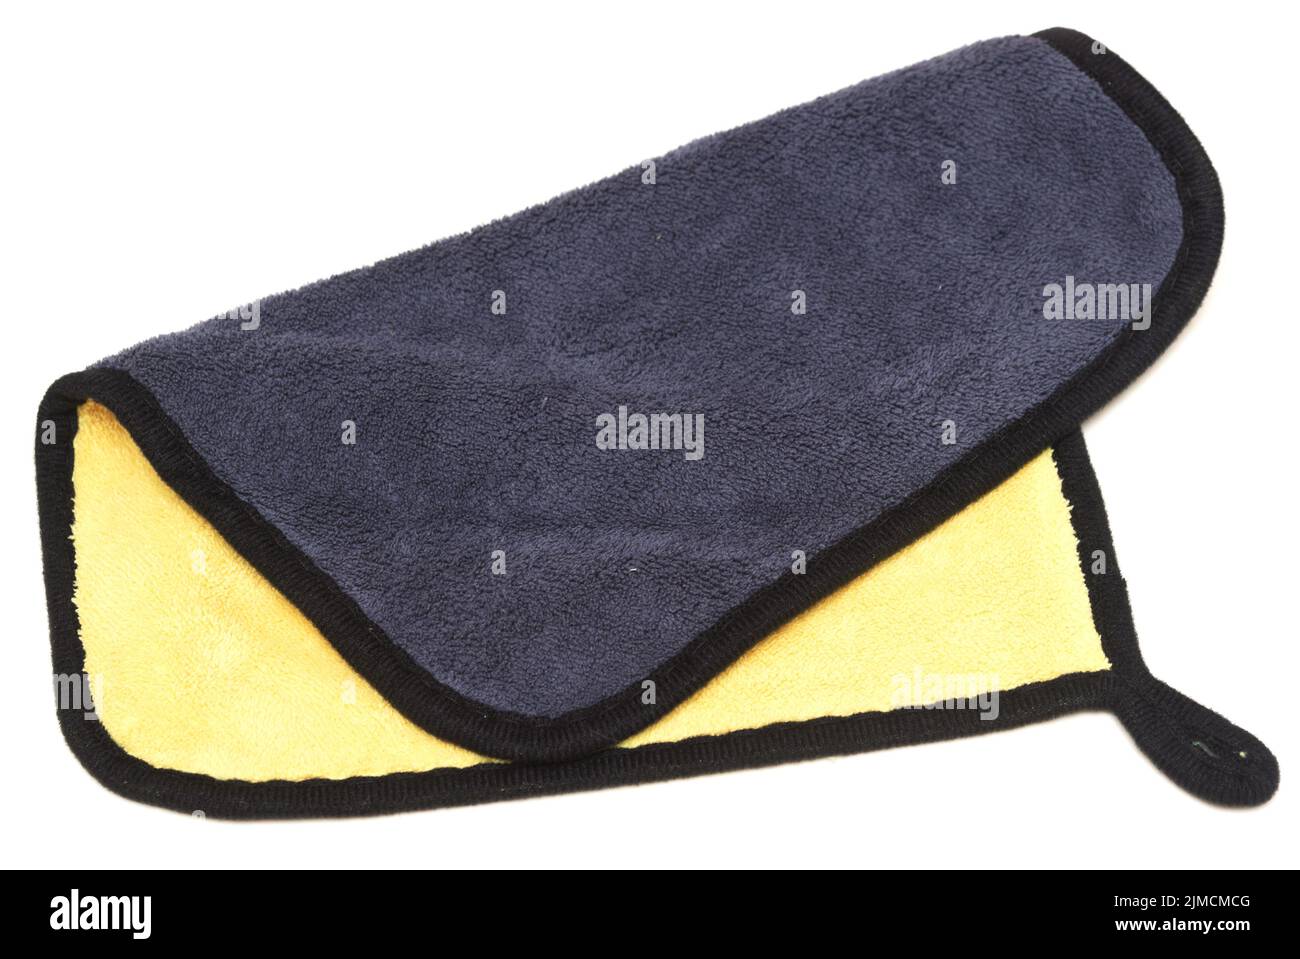 Microfiber cleaning cloth Stock Photo